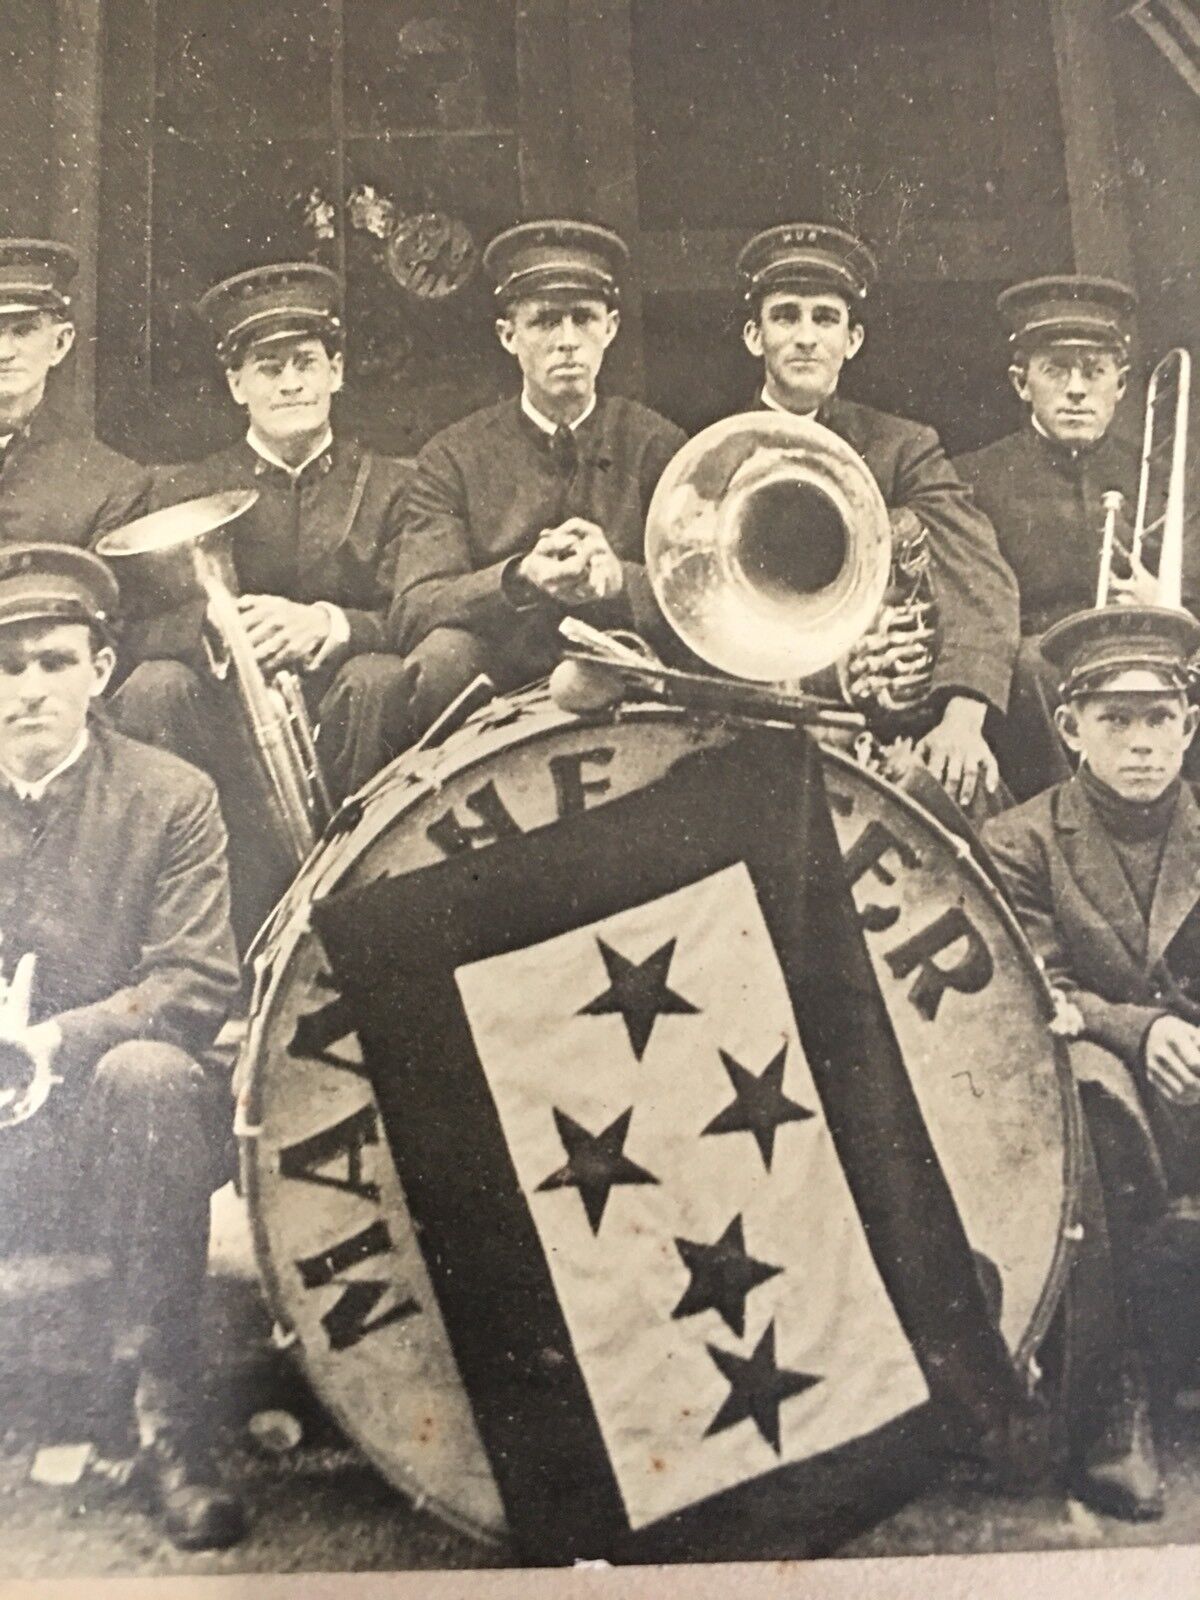 Great Antique Photo of A Marching Band  Manchester Vermont Early 20thc 